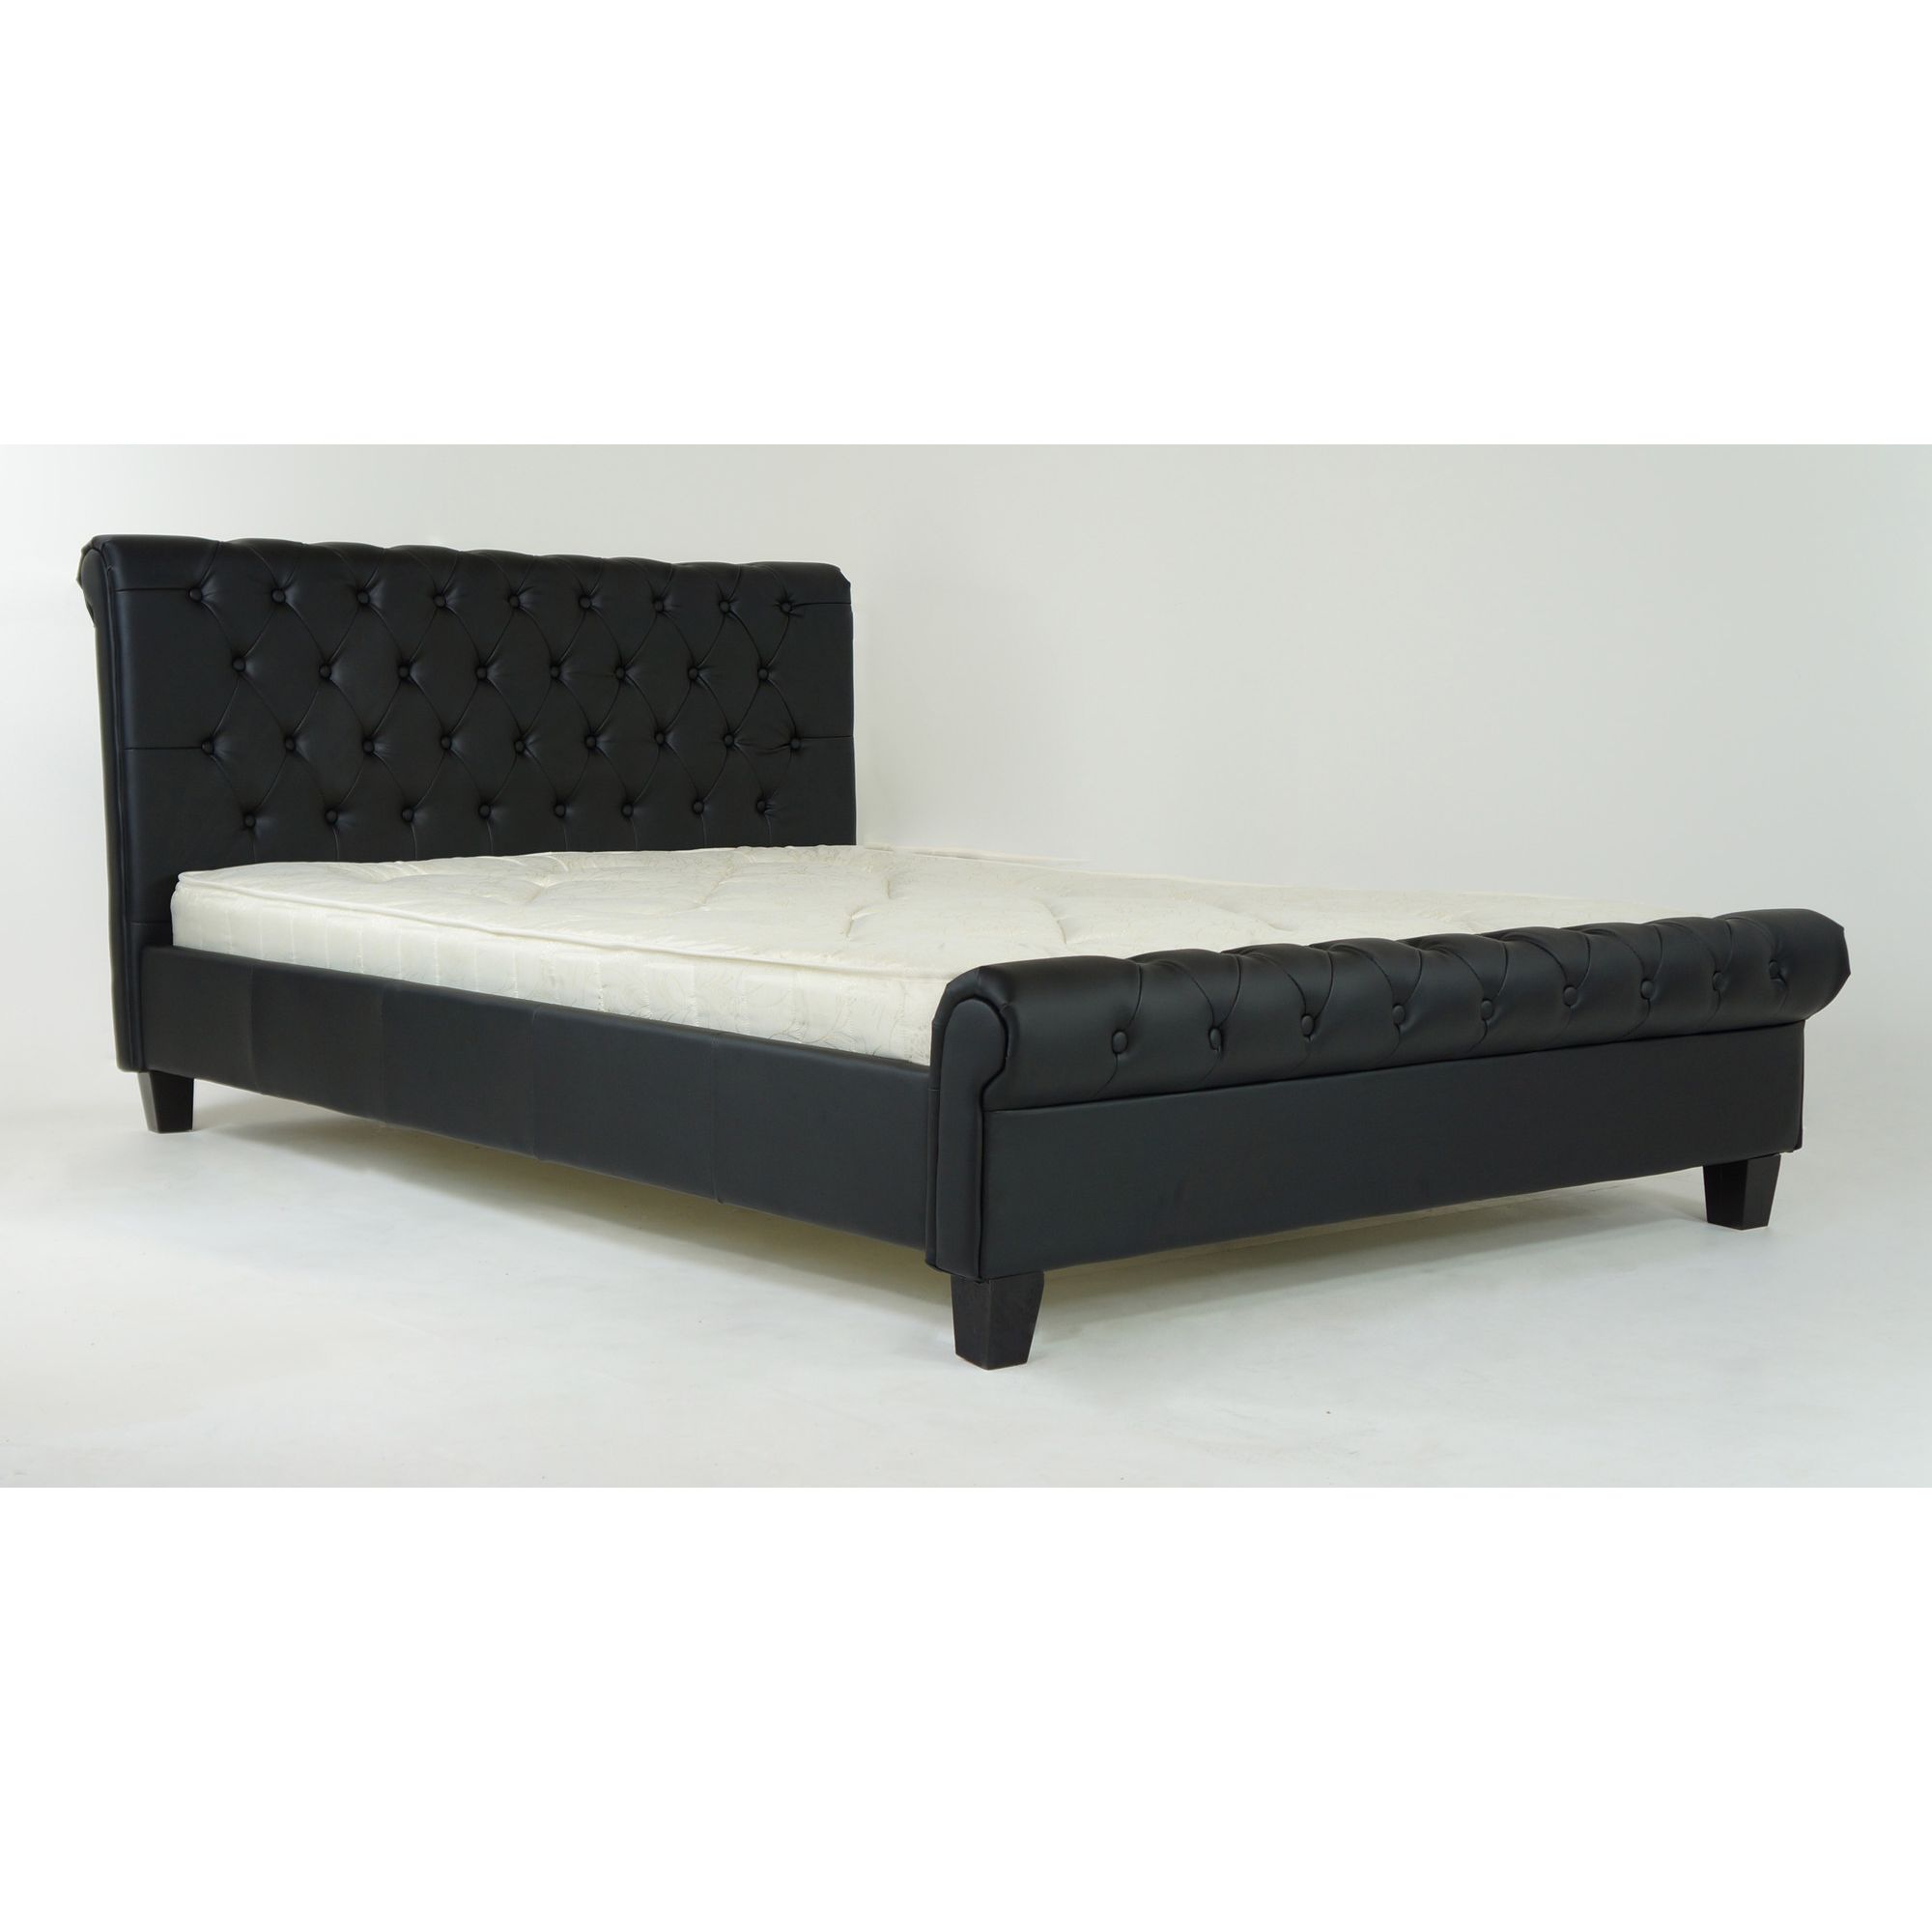 Alpha furniture Chesterfield Bed - Black - Double - Drawers at Tesco Direct